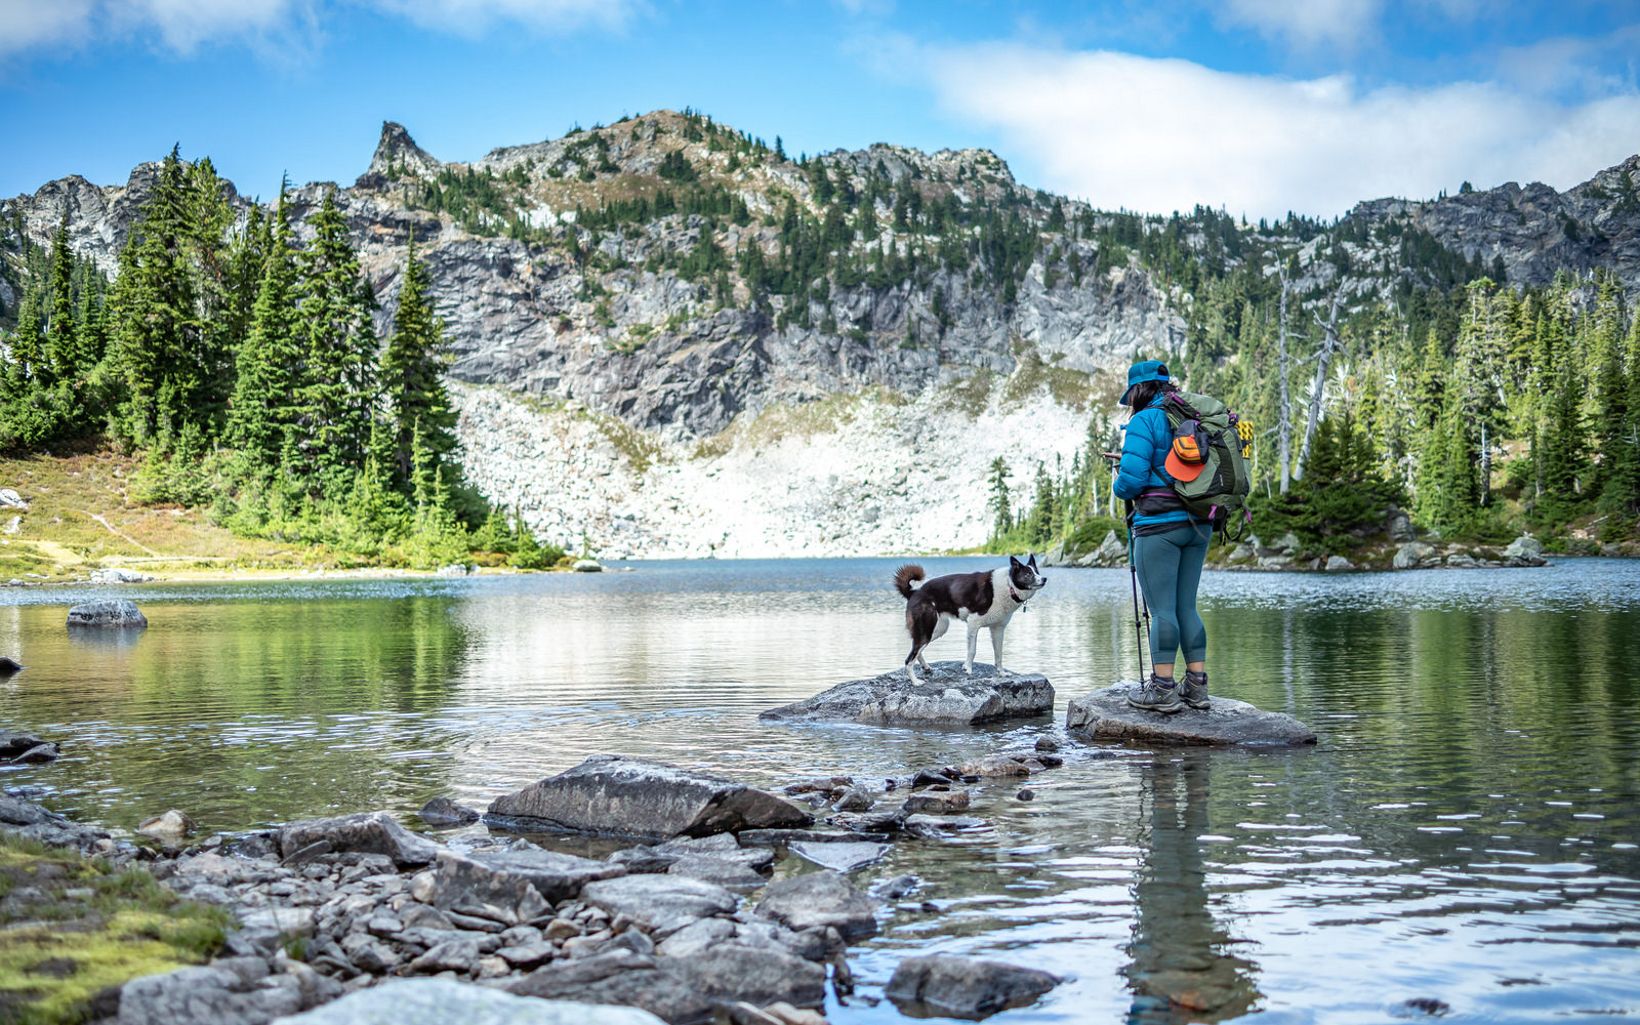 A hiker and a dog at Minotaur Lake in the Cascades Mountain Range in Washington state.